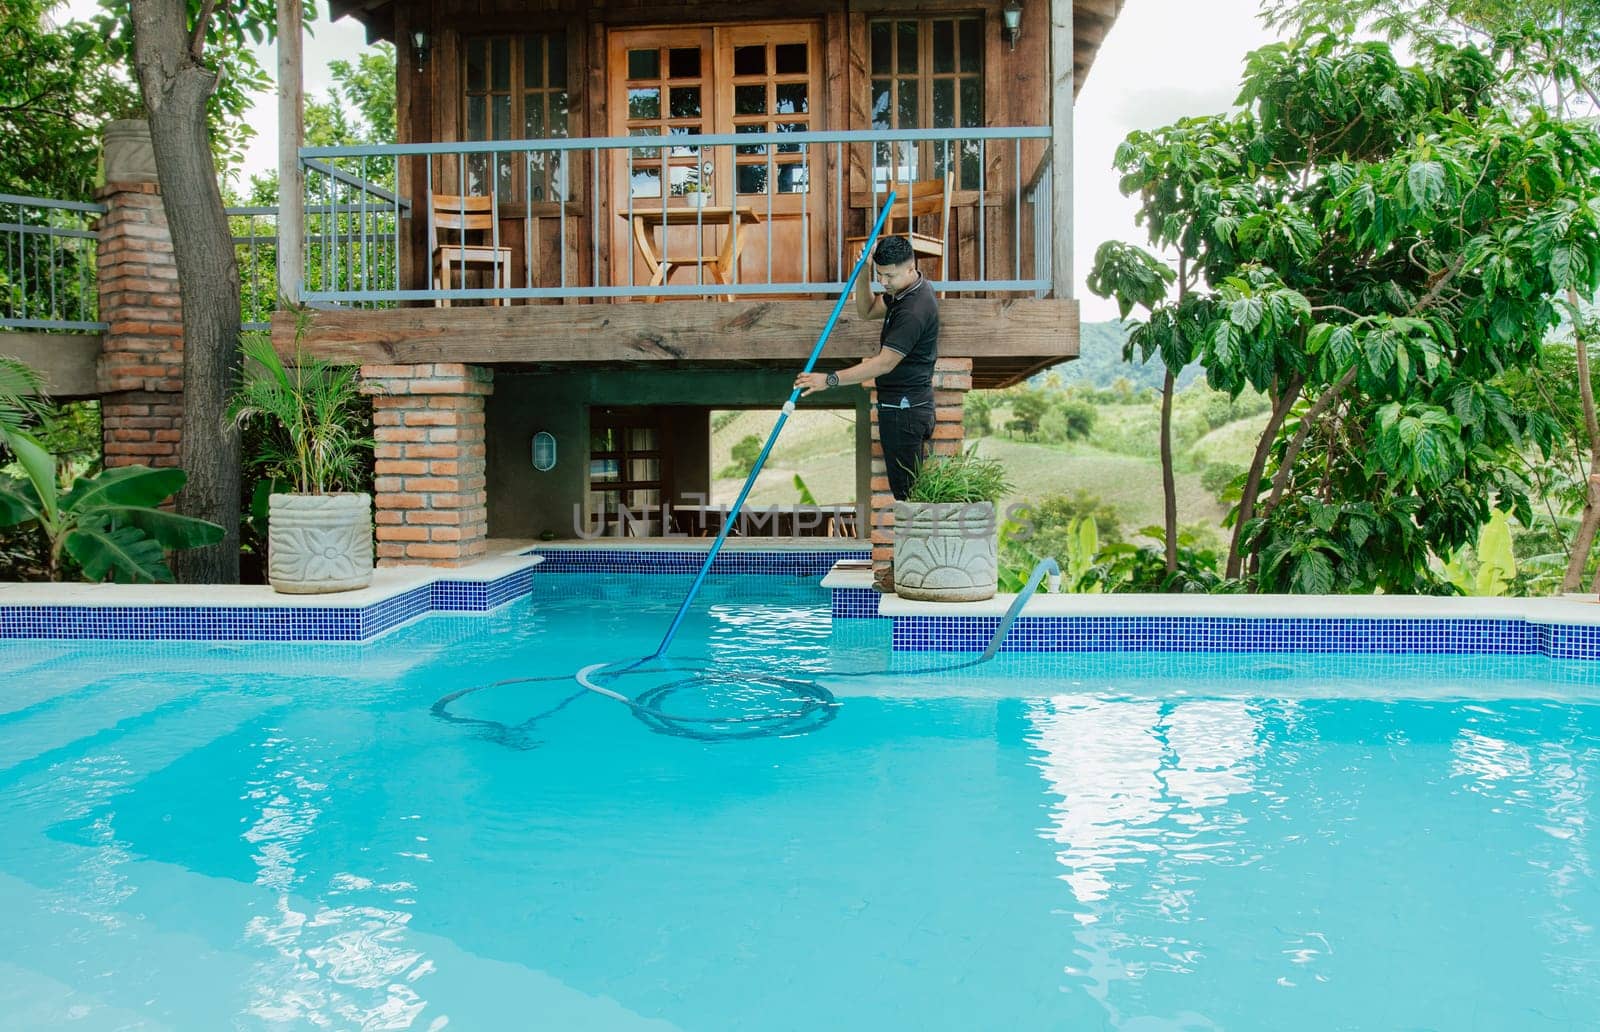 Maintenance man cleaning swimming pool with vacuum suction hose. Worker cleaning a beautiful swimming pool with suction hose